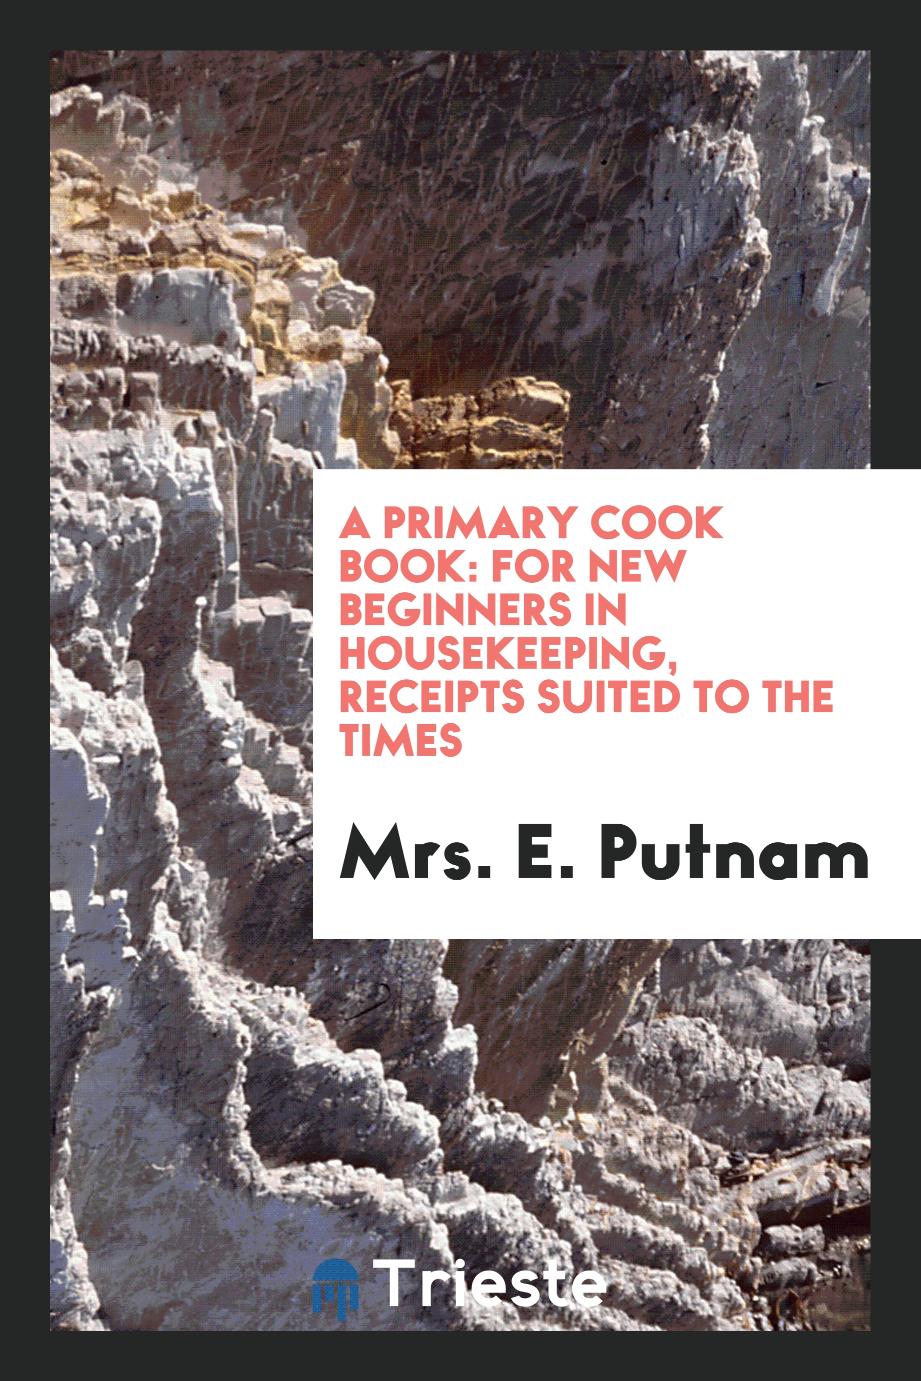 A Primary Cook Book: For New Beginners in Housekeeping, receipts suited to the times